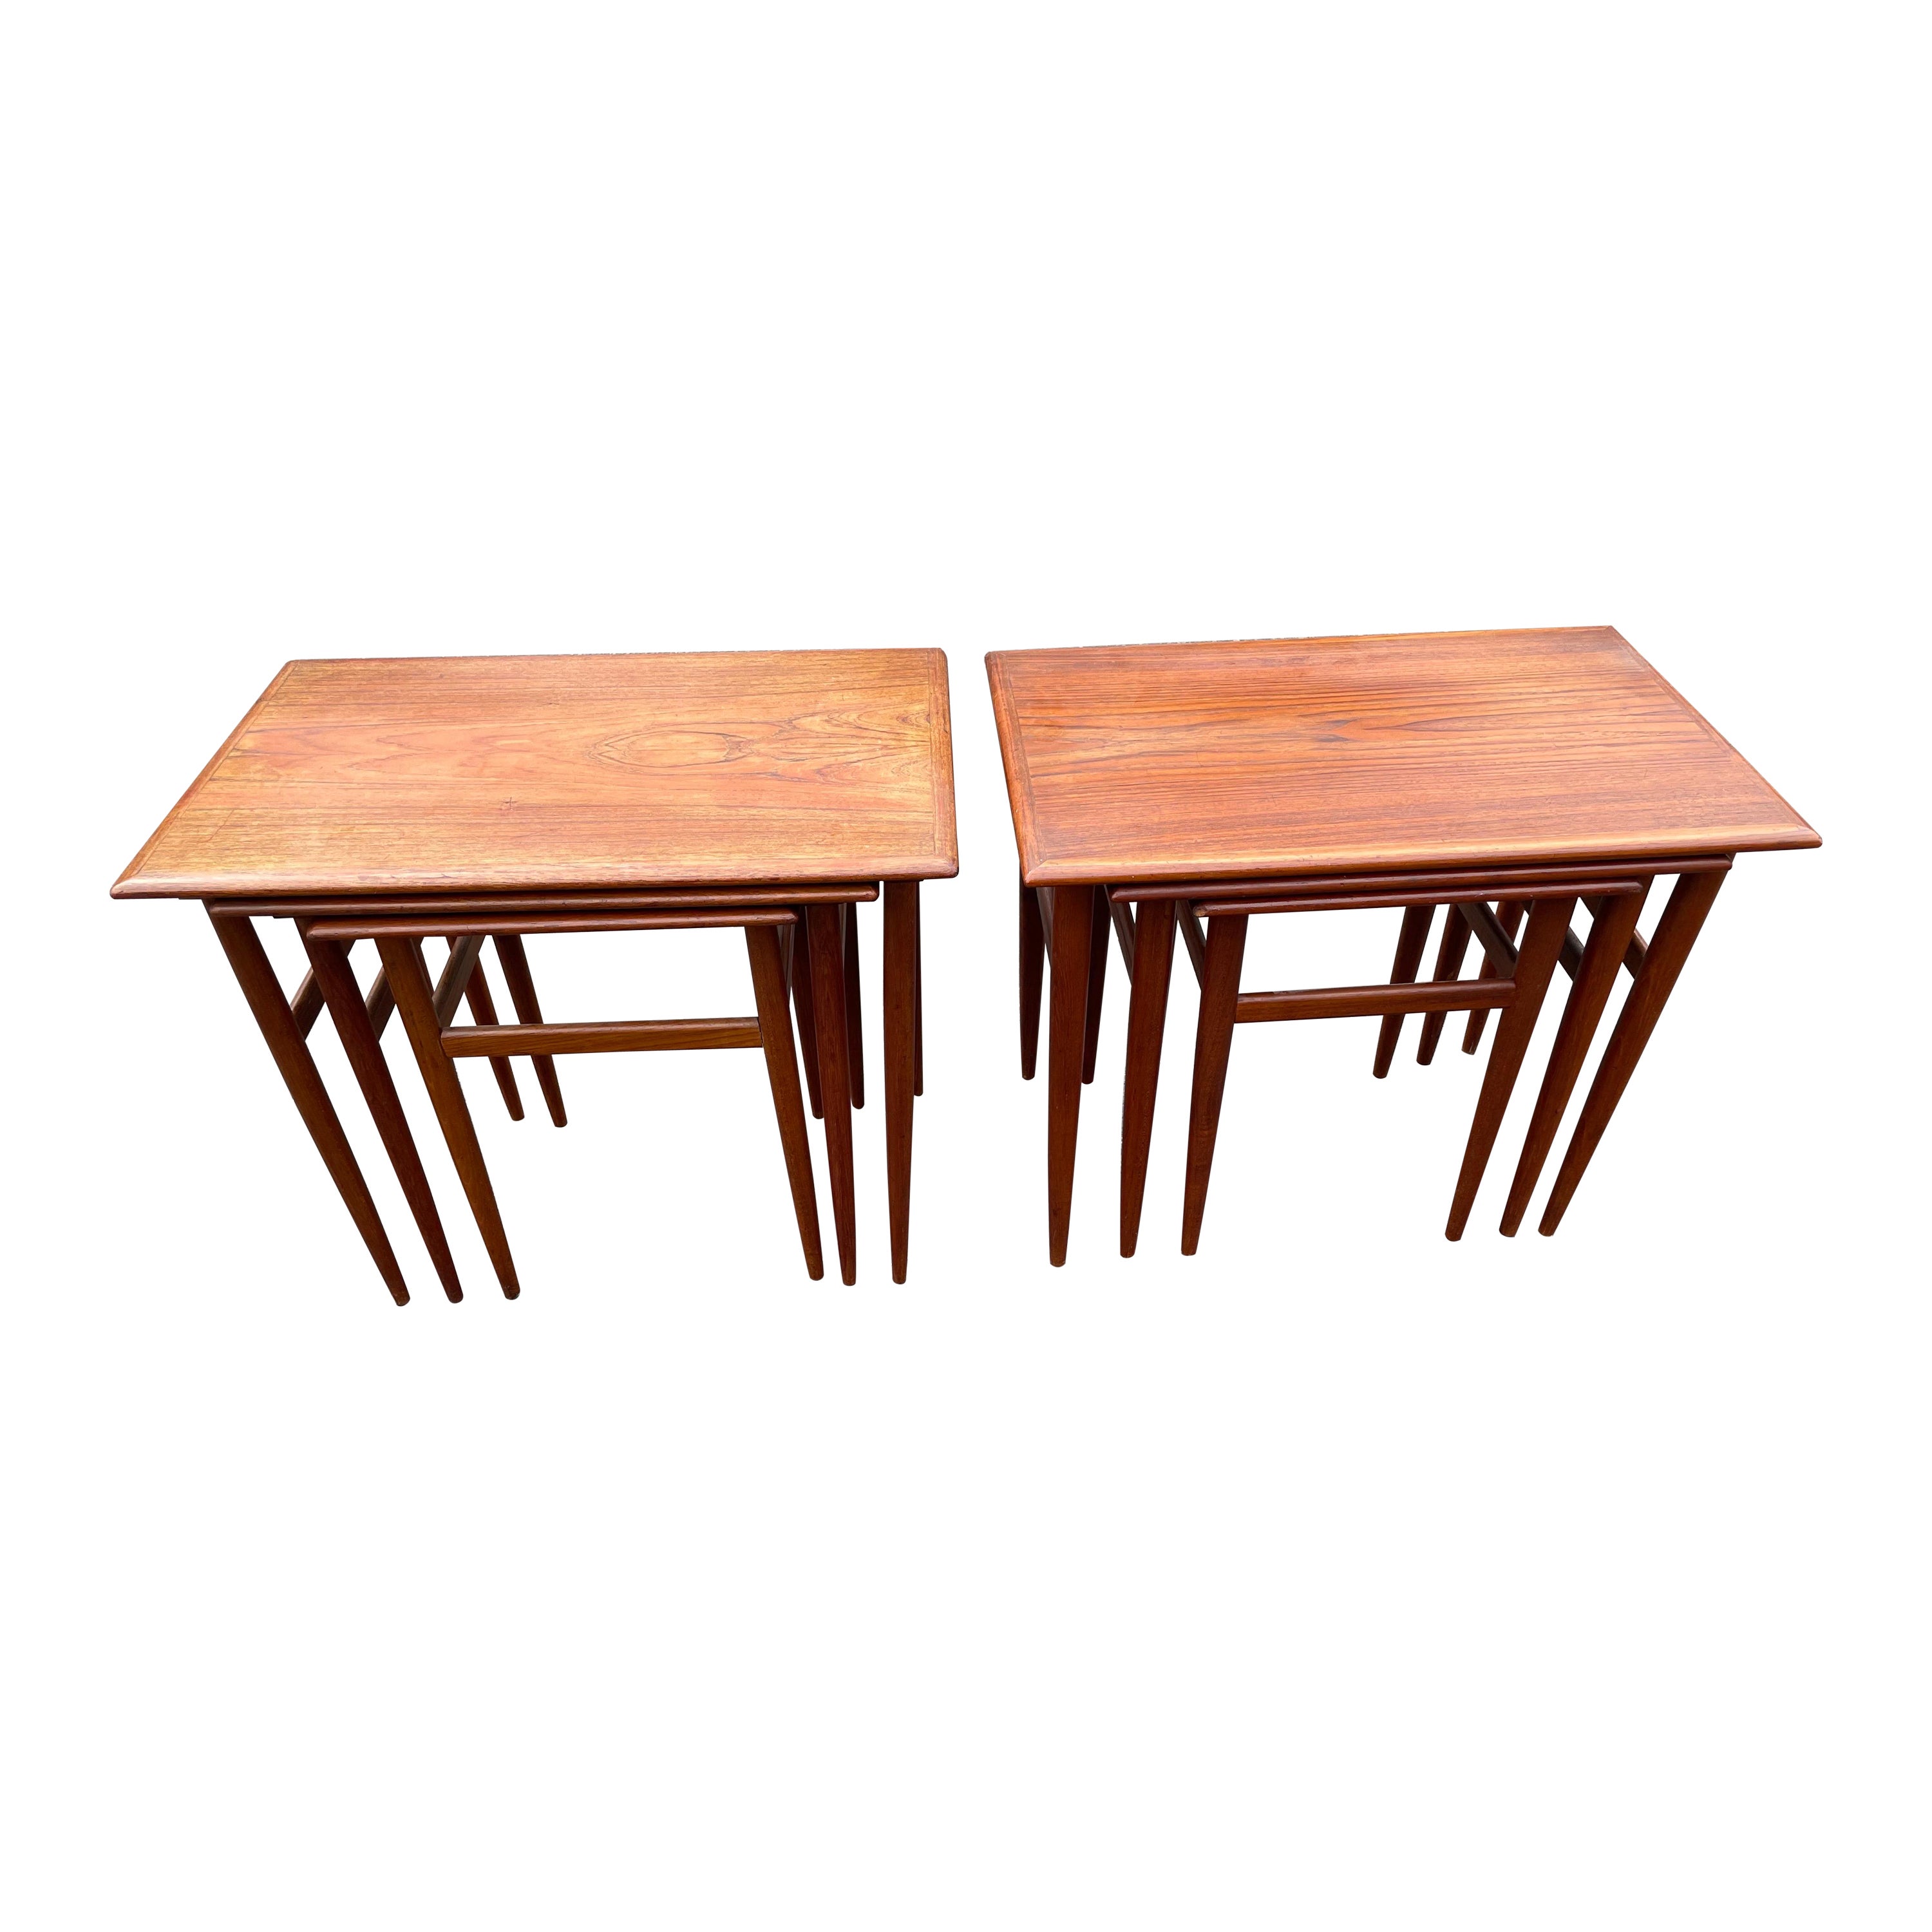 Pair of Identical Danish Teak Nesting Tables from the, 1960s